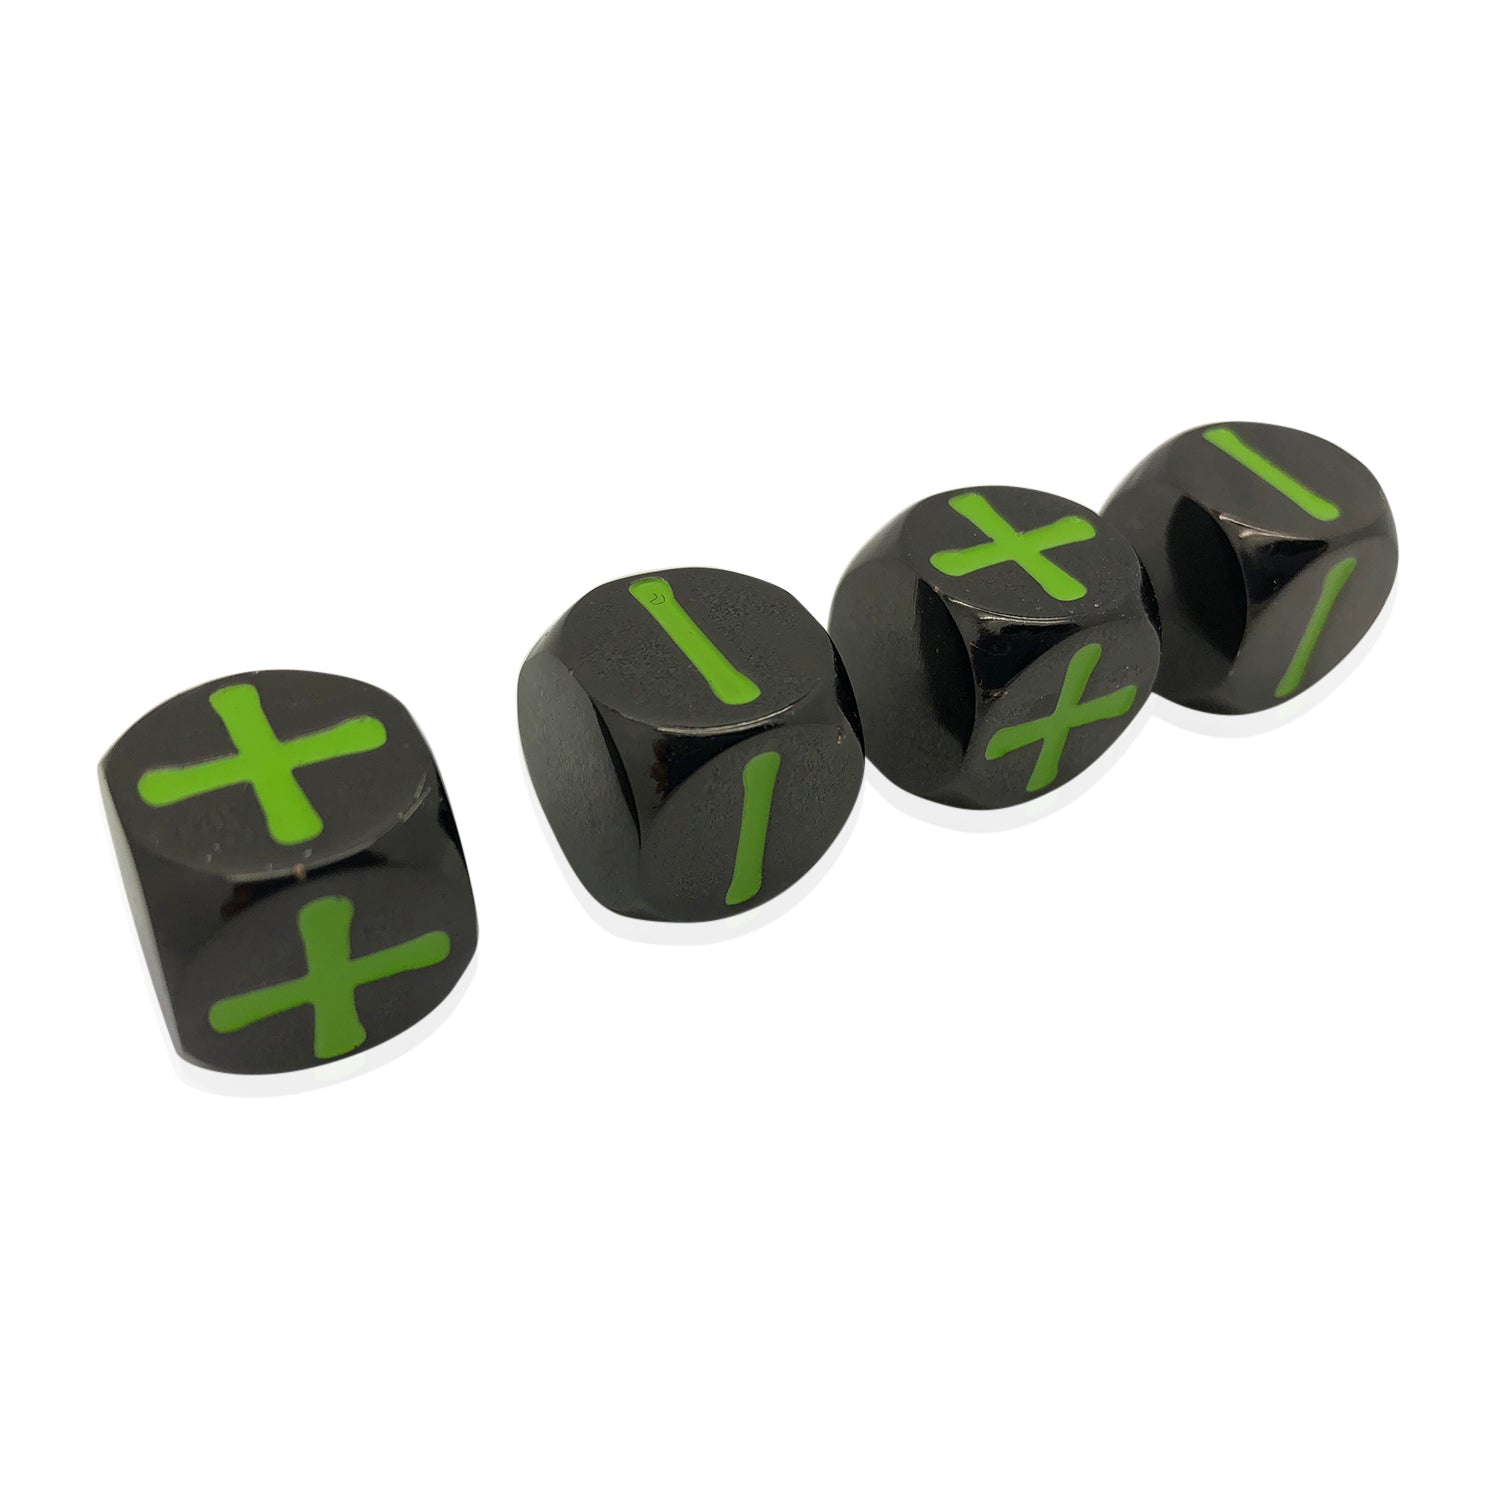 Fate Dice – Poisoned Daggers Pack of 4 Metal Dice - NOR 00716